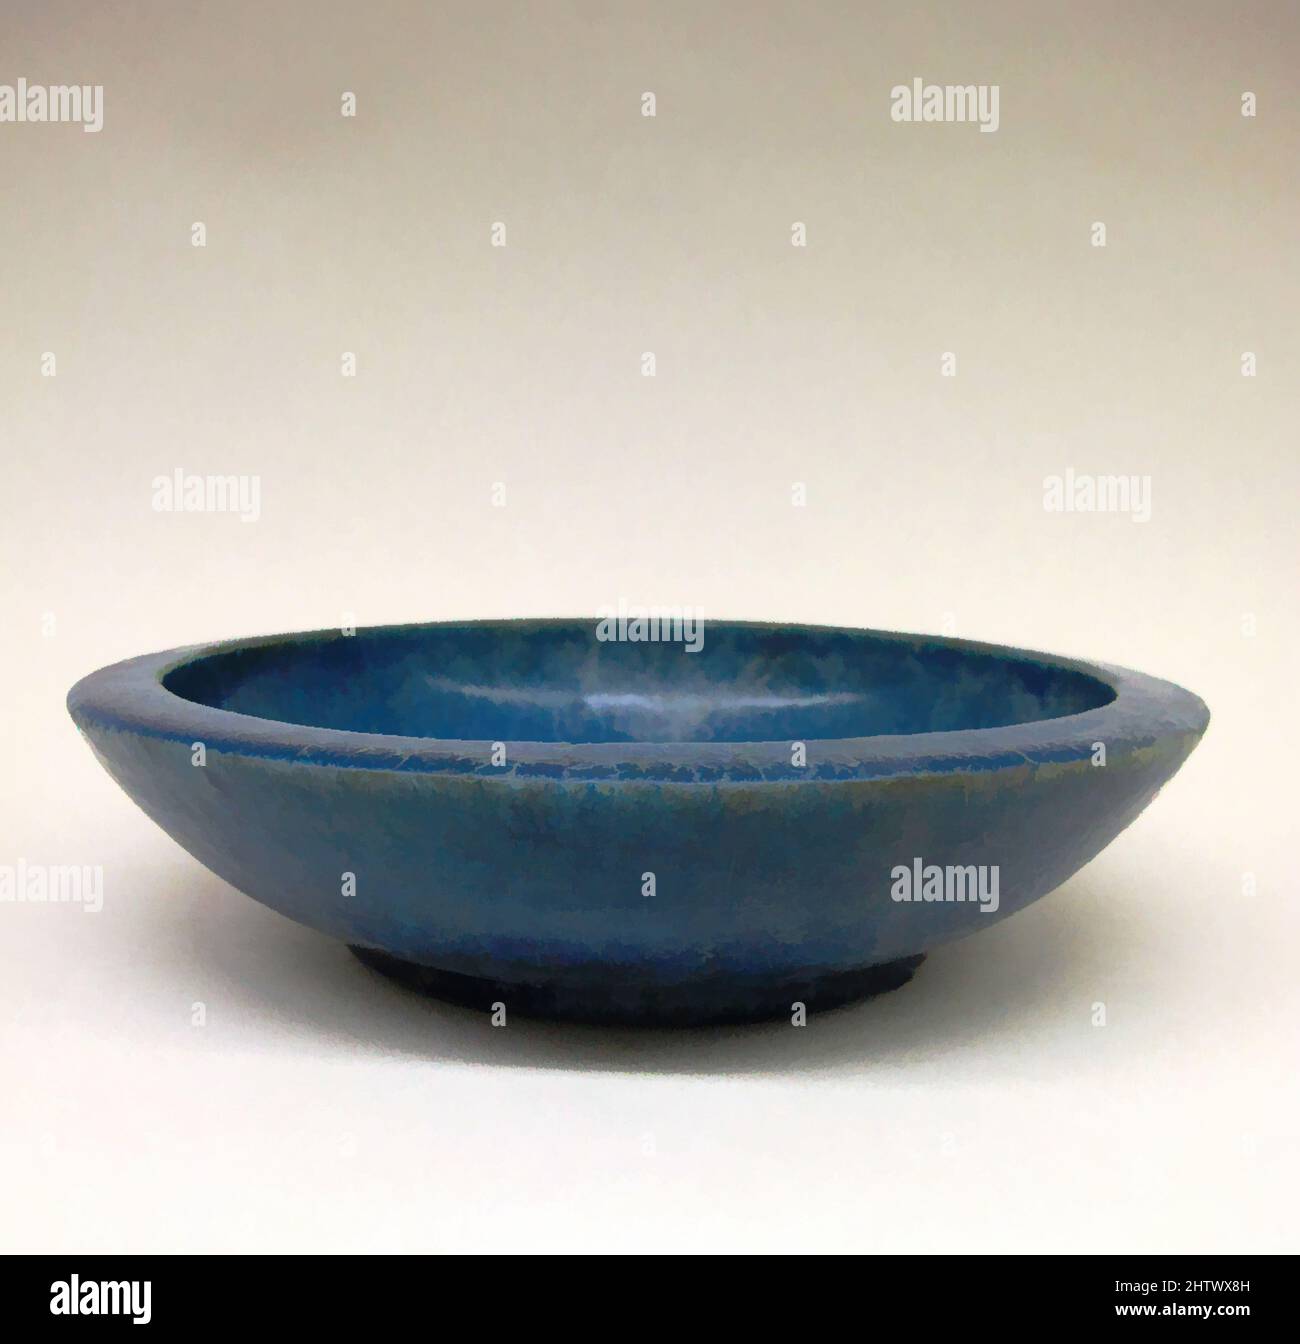 Art inspired by Faience bowl, Hellenistic, 332–30 B.C., Ptolemaic, Faience, Diam.: 8 11/16 in. (22 cm), Miscellaneous-Faience, This bowl, preserved intact, is a fine example of Egyptian faience ware. The Egyptians mastered the production of this luxury ware as early as the late, Classic works modernized by Artotop with a splash of modernity. Shapes, color and value, eye-catching visual impact on art. Emotions through freedom of artworks in a contemporary way. A timeless message pursuing a wildly creative new direction. Artists turning to the digital medium and creating the Artotop NFT Stock Photo